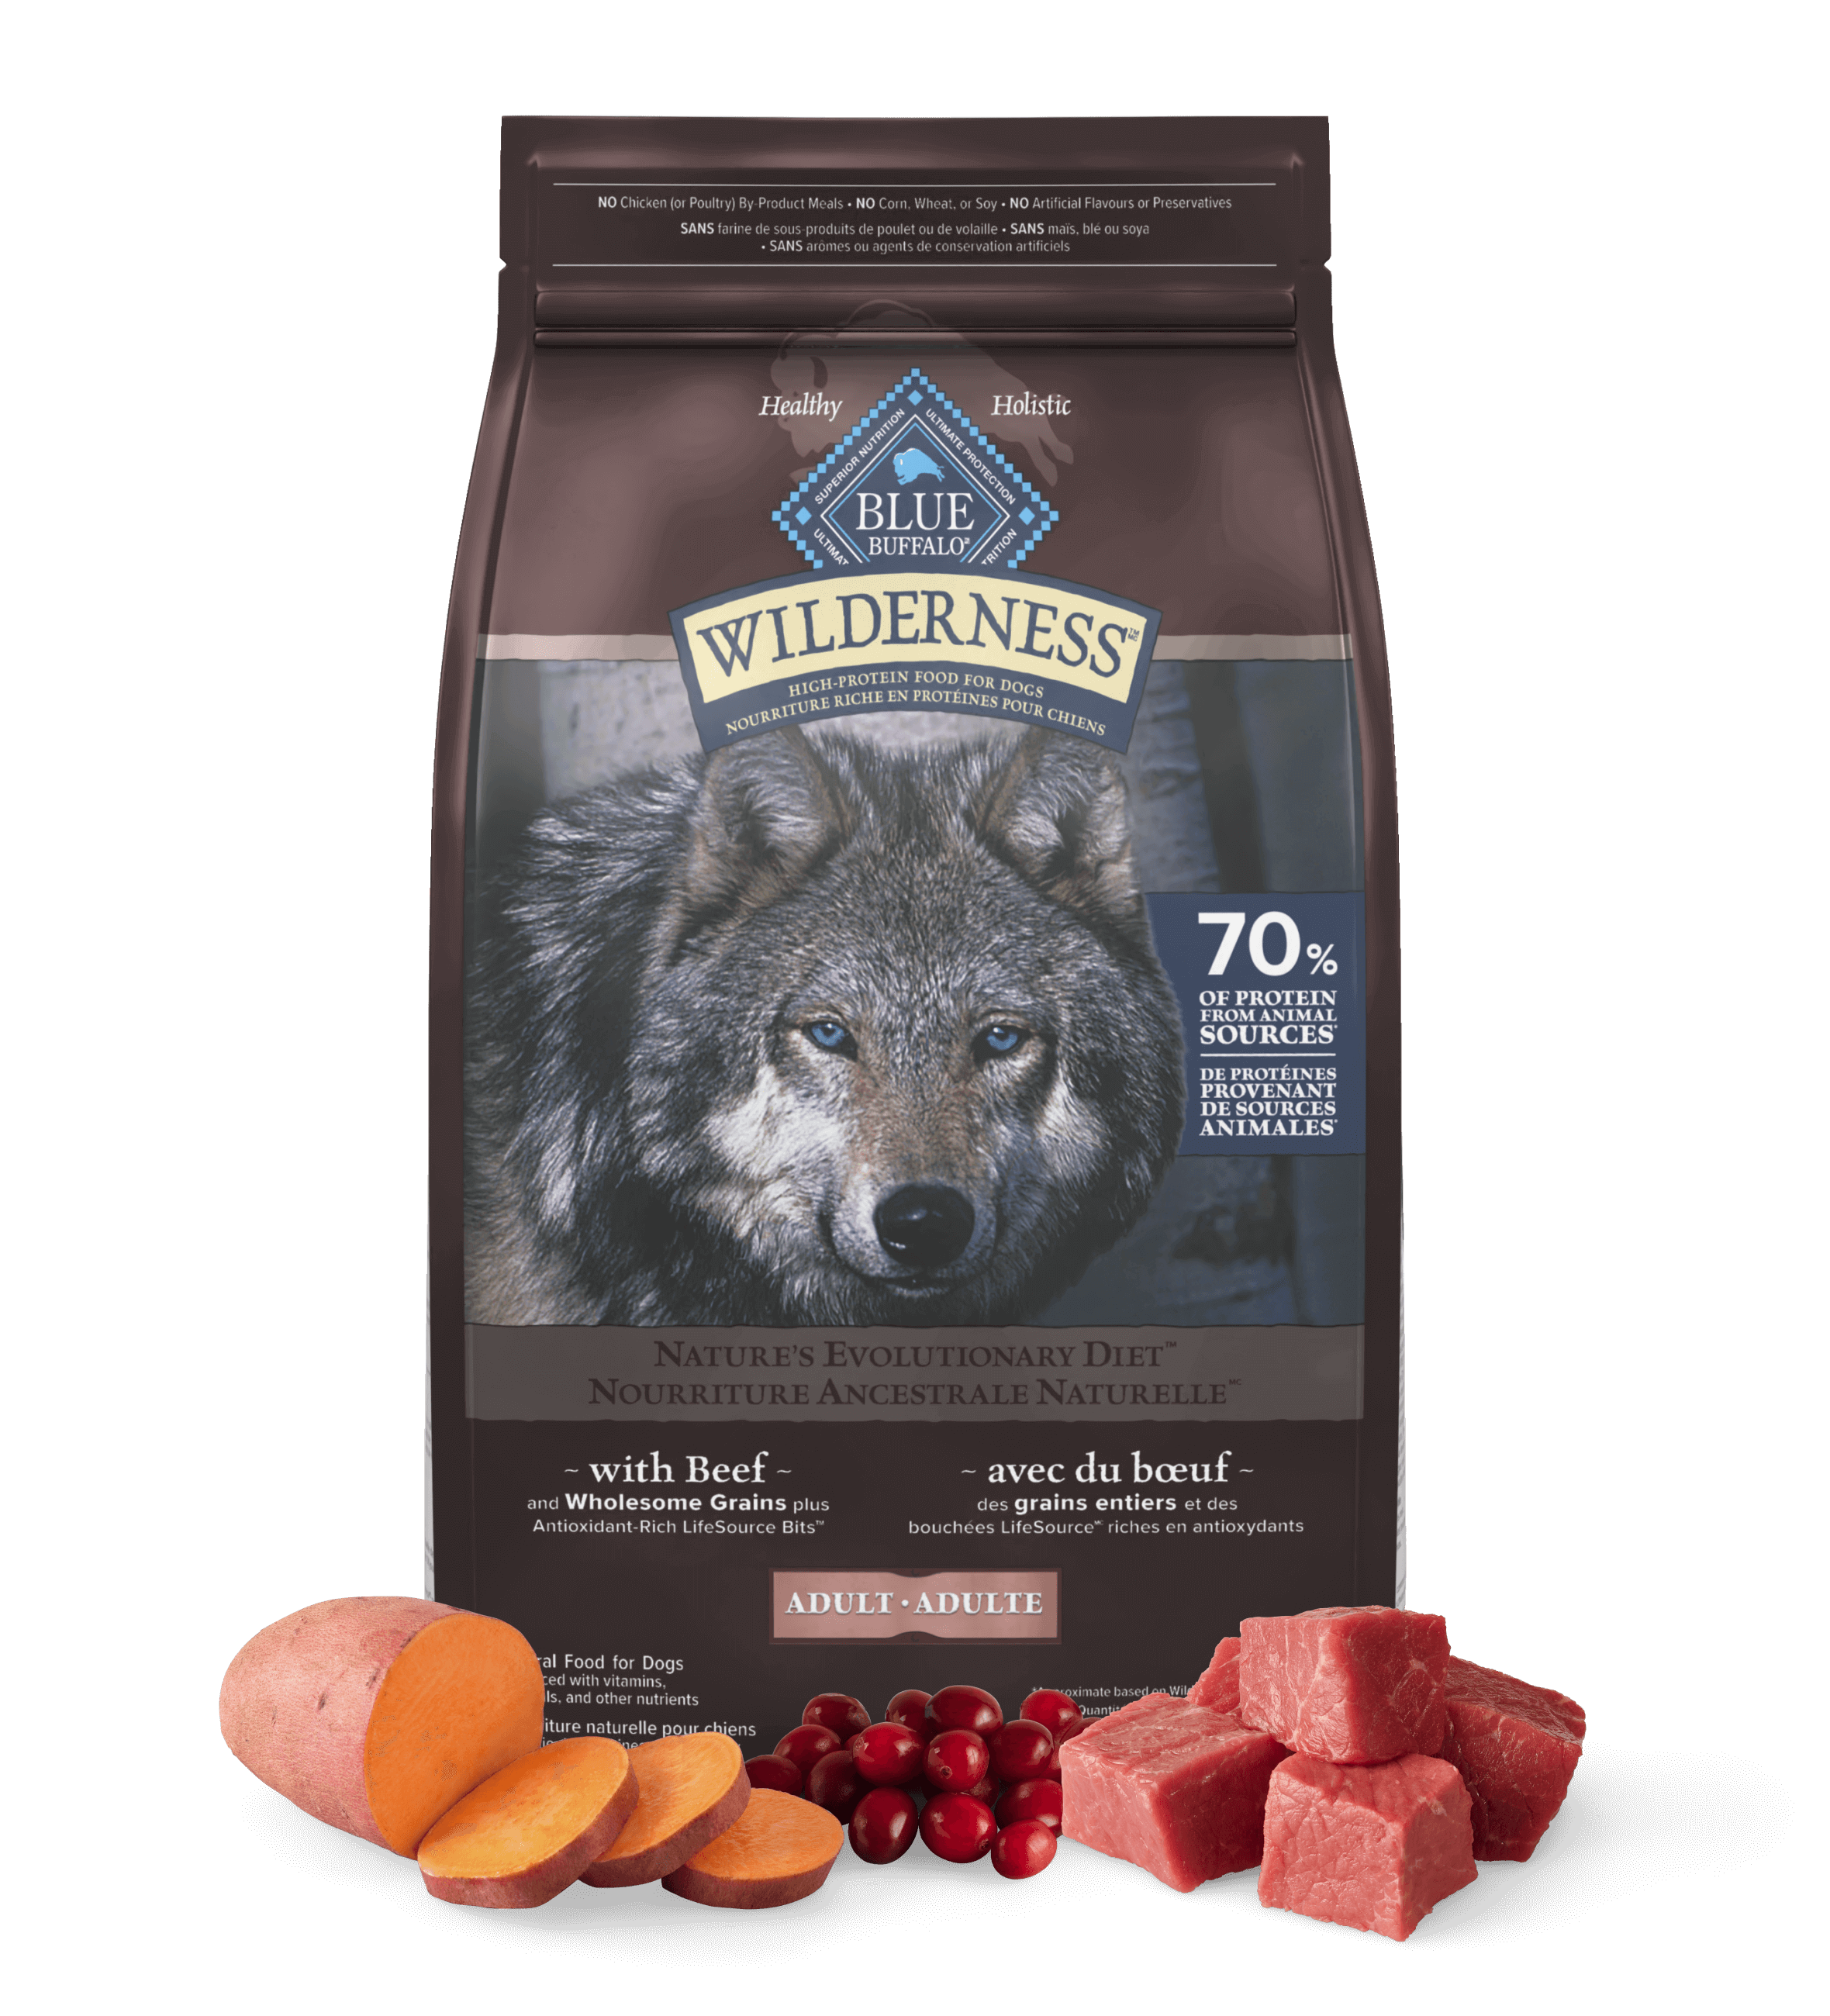 Wilderness Adult Beef with Wholesome Grains Recipe Bag of Dog Food